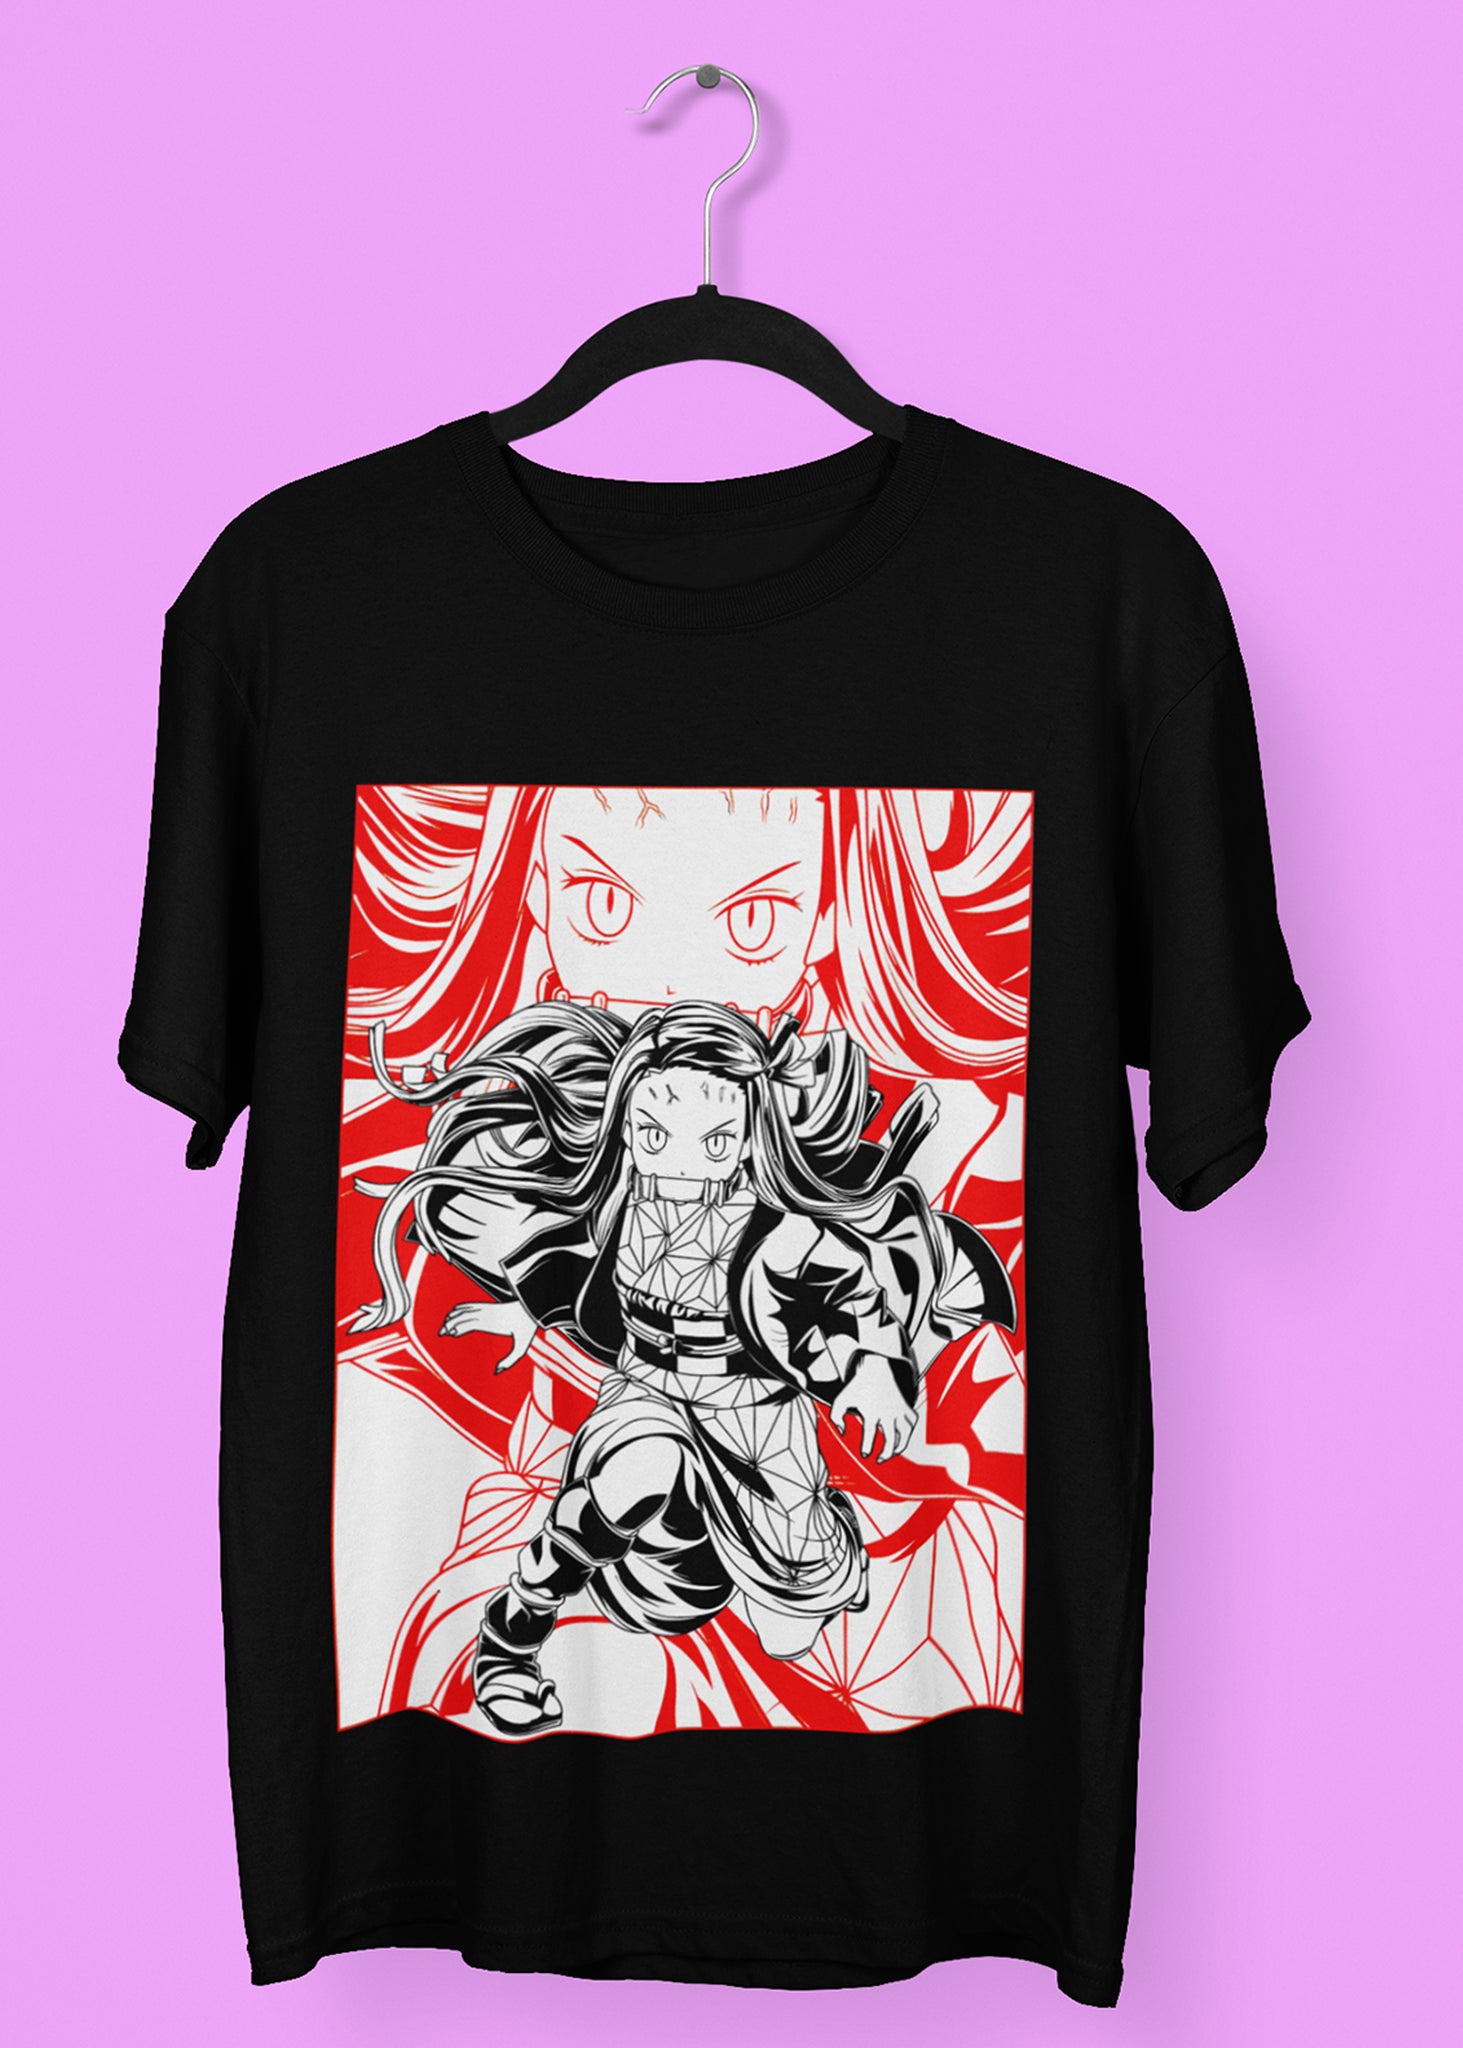 AirDrop Anime Slayer Relaxed Fit Unisex  T-Shirt